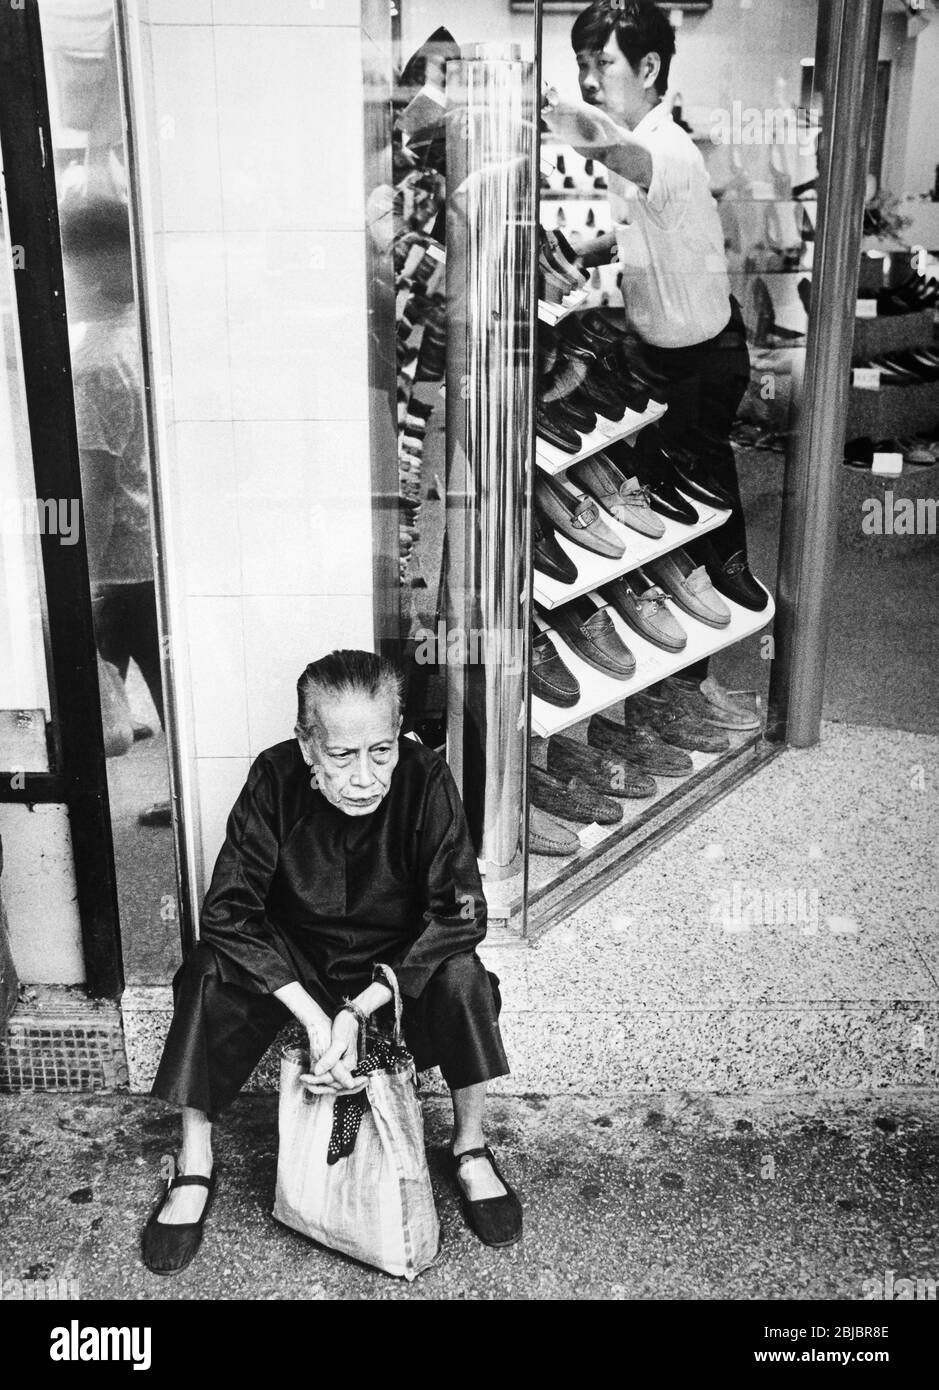 Hong Kong October 1986 An elderly woman rests on the shep of a shoe shop in Wan Chai. The picture is is part of a collection of photographs taken in Hong Kong between September and November, 1986. They represent a snapshot of Daily Life in the Crown Colony eleven years before sovereignty was transferred back to mainland China. Photograph by Howard Walker / Alamy. Stock Photo